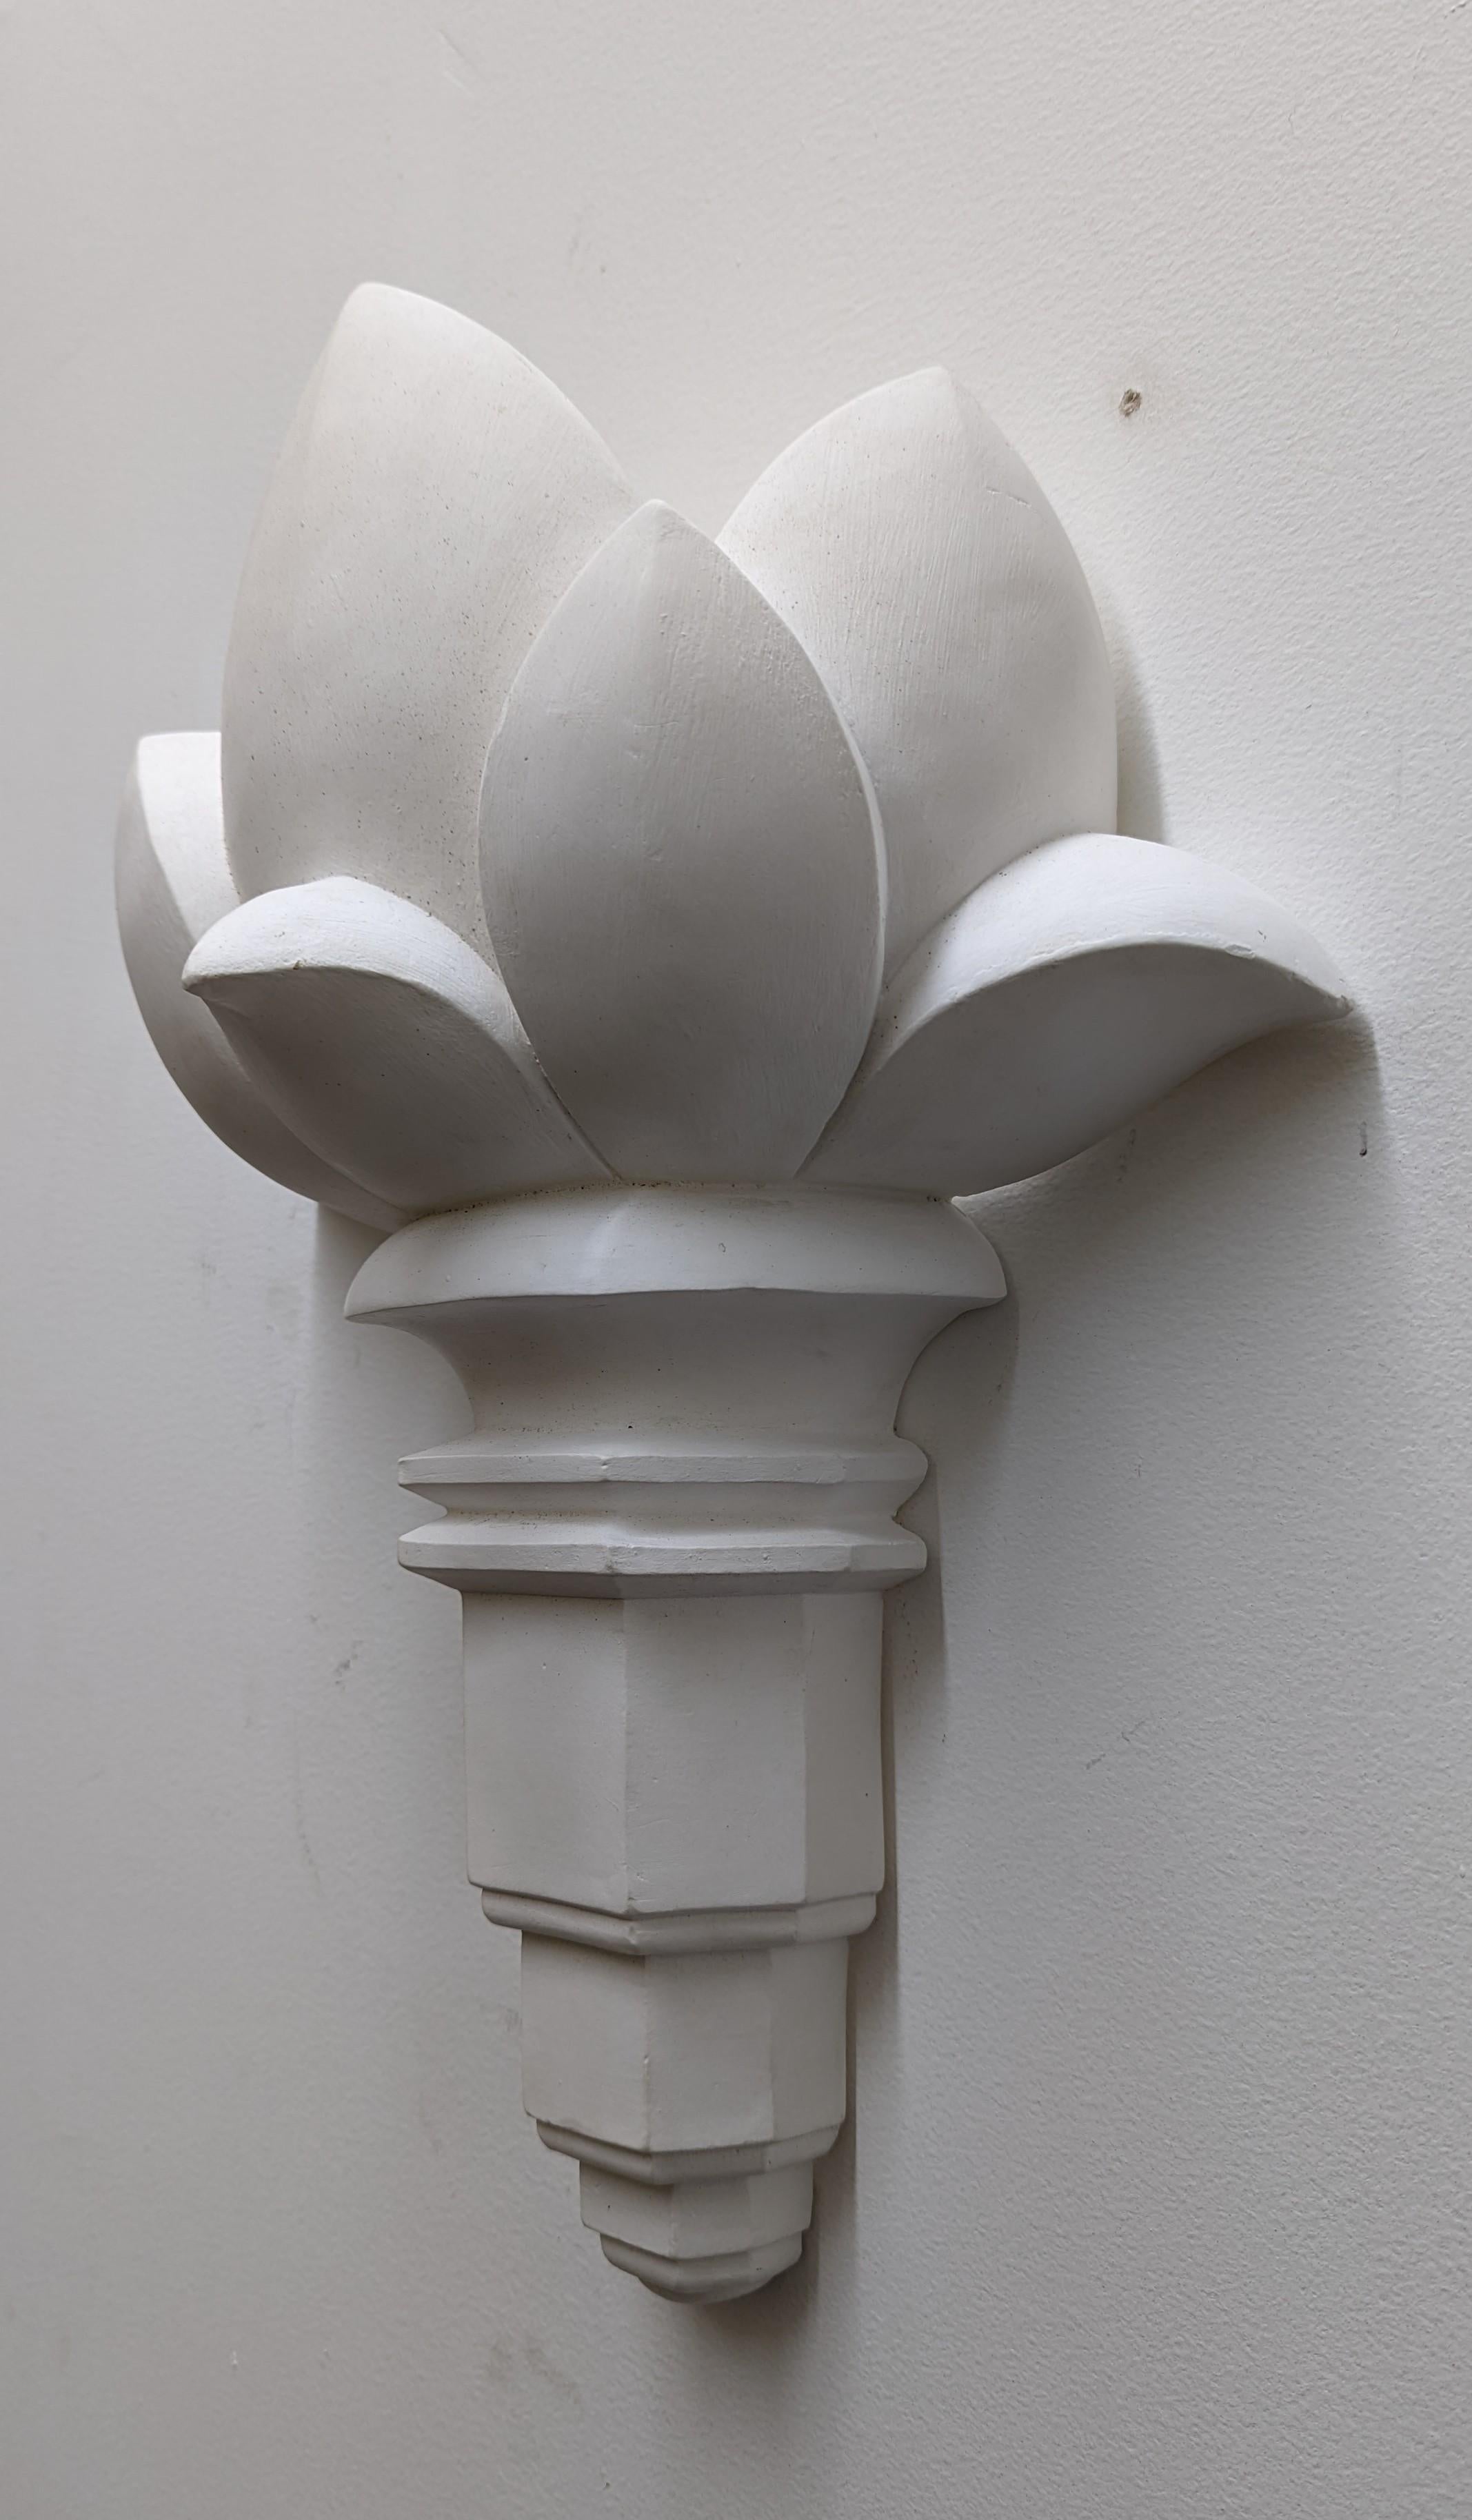 Contemporary French Art Deco Wall Sconces by Bourgeois Boheme Atelier For Sale